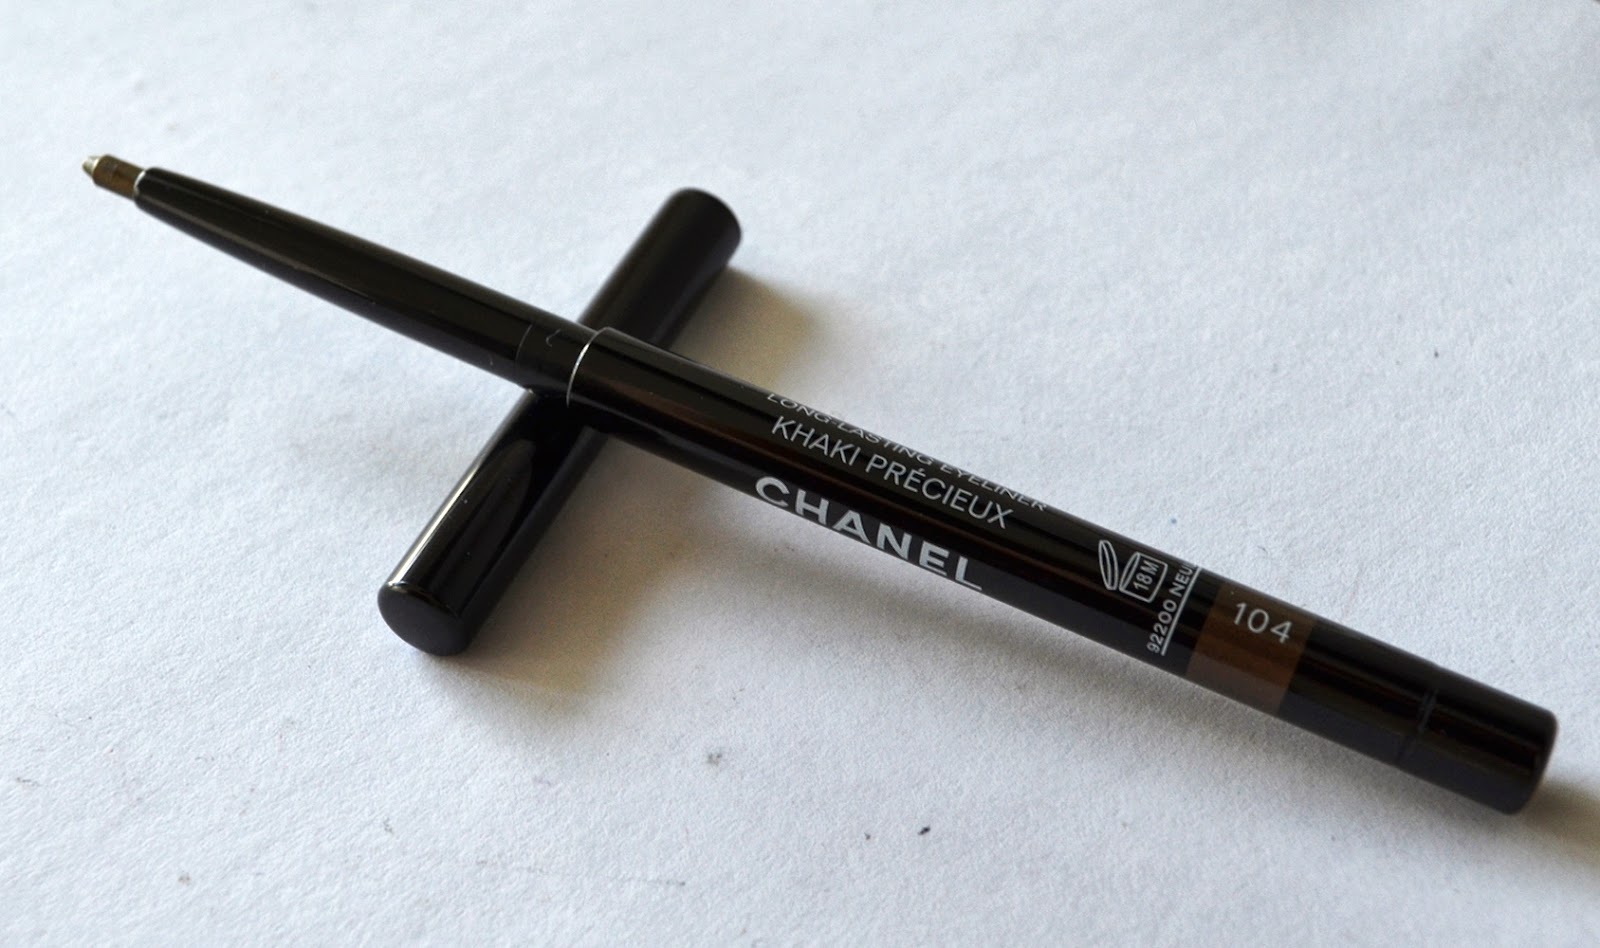 Chanel Stylo Yeux Waterproof #104 Khaki Precieux from Superstition